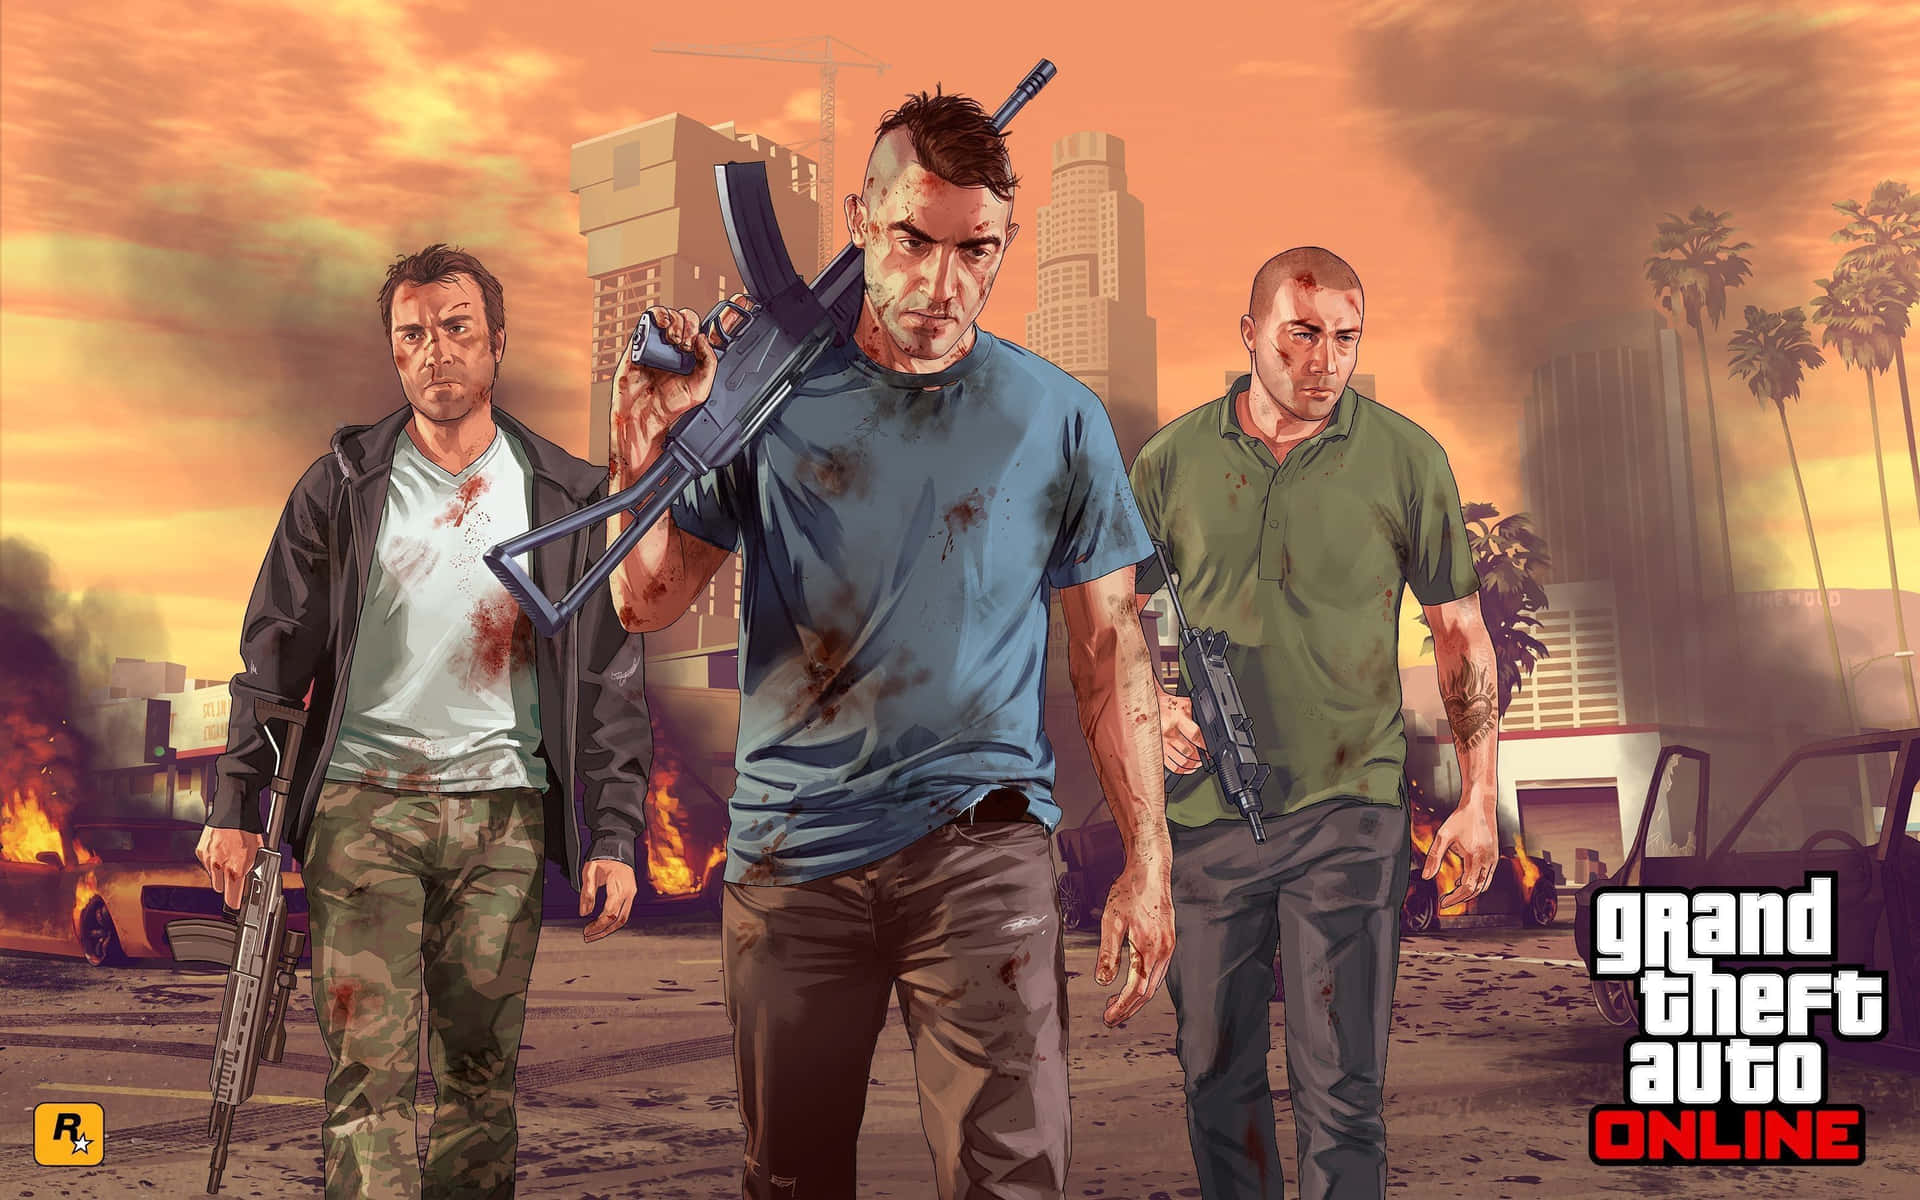 Get Ready for the Action Packed Grand Theft Auto 5 Wallpaper